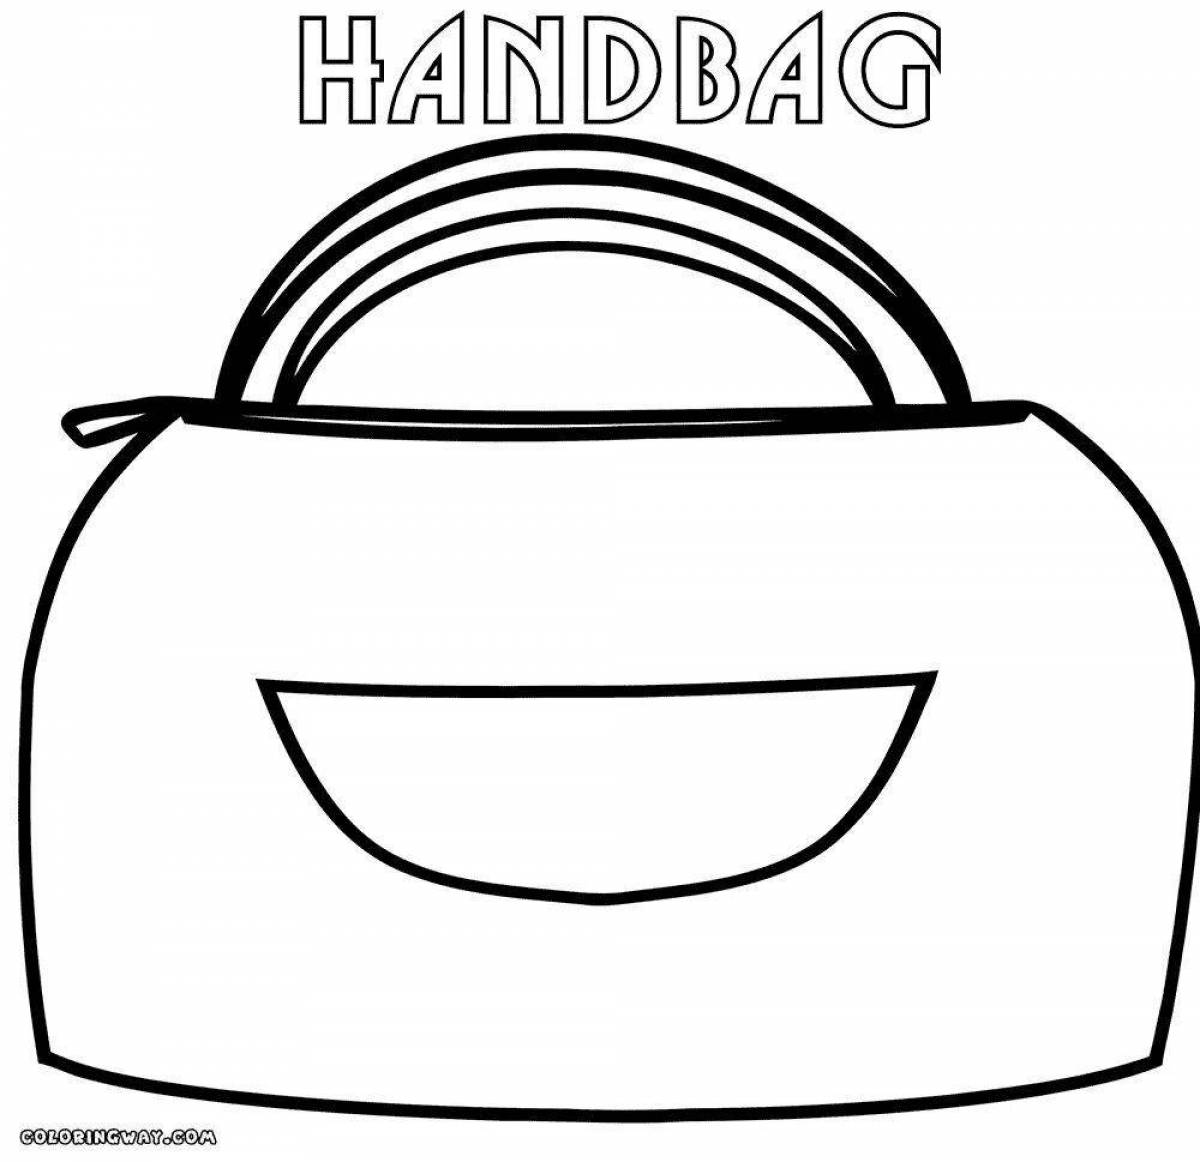 Outstanding bag coloring page for the little ones